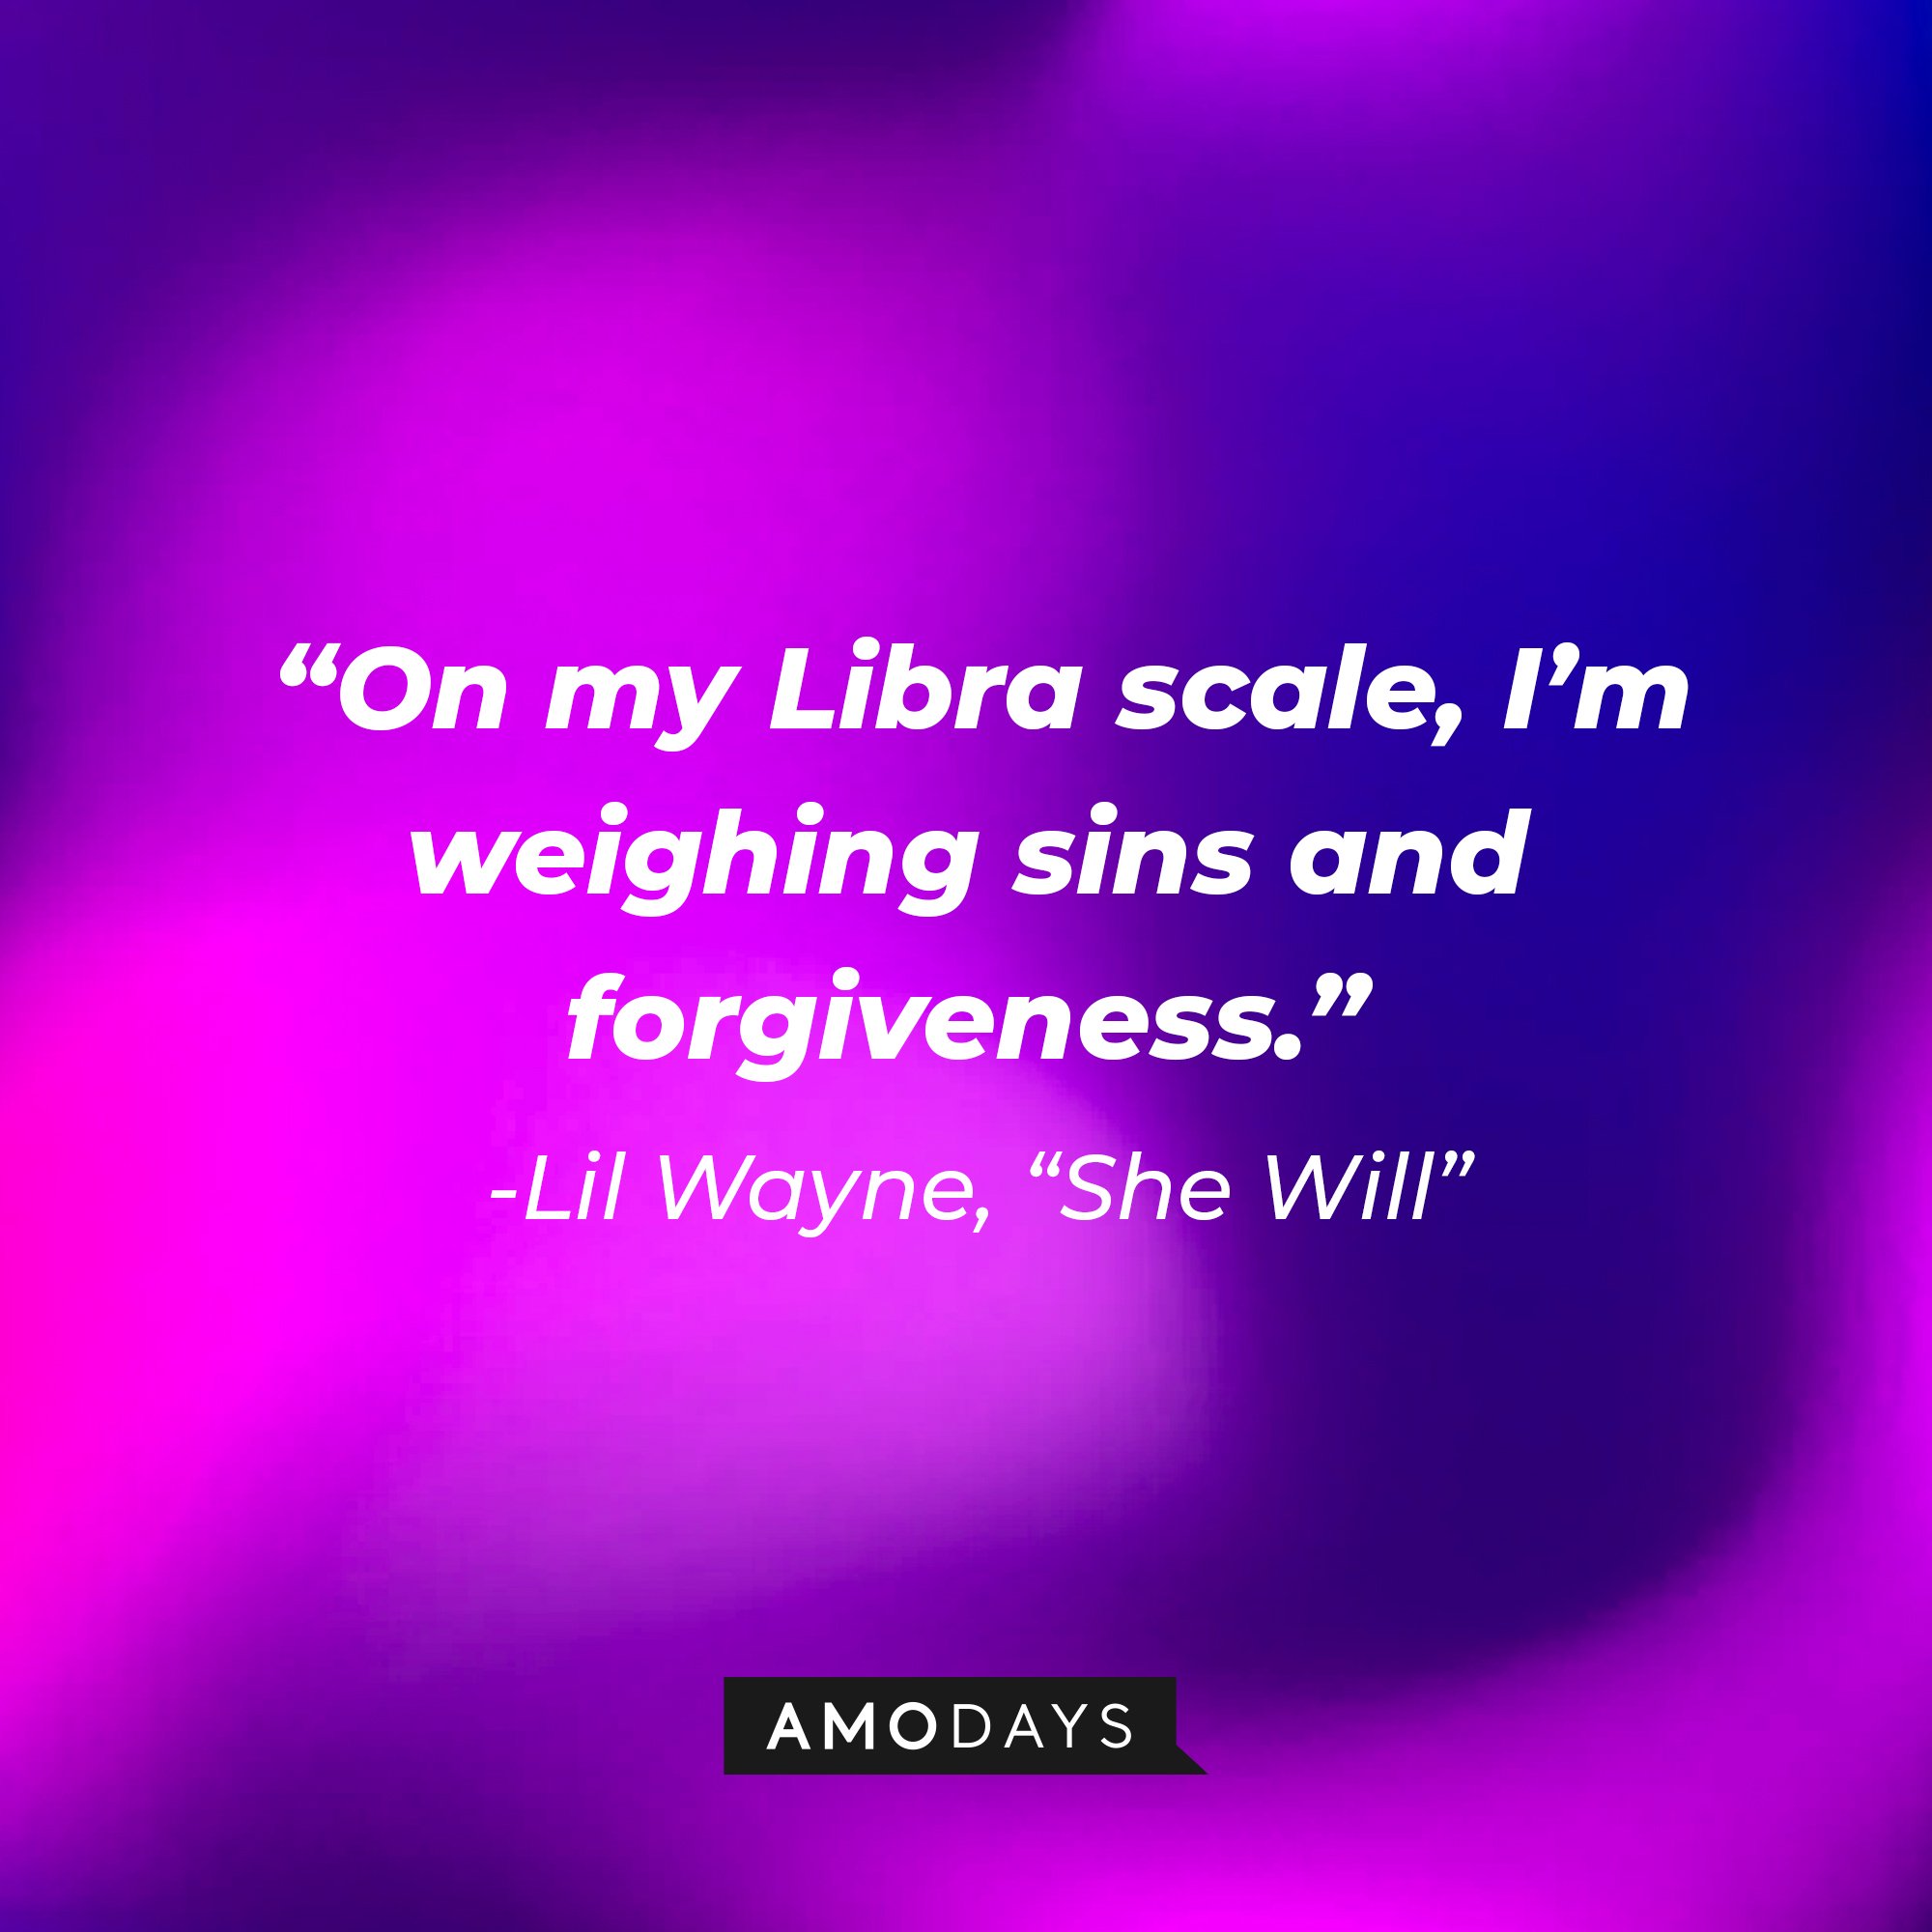 Lil Wayne's quote from "She Will": "On my Libra scale, I’m weighing sins and forgiveness." | Image: AmoDays